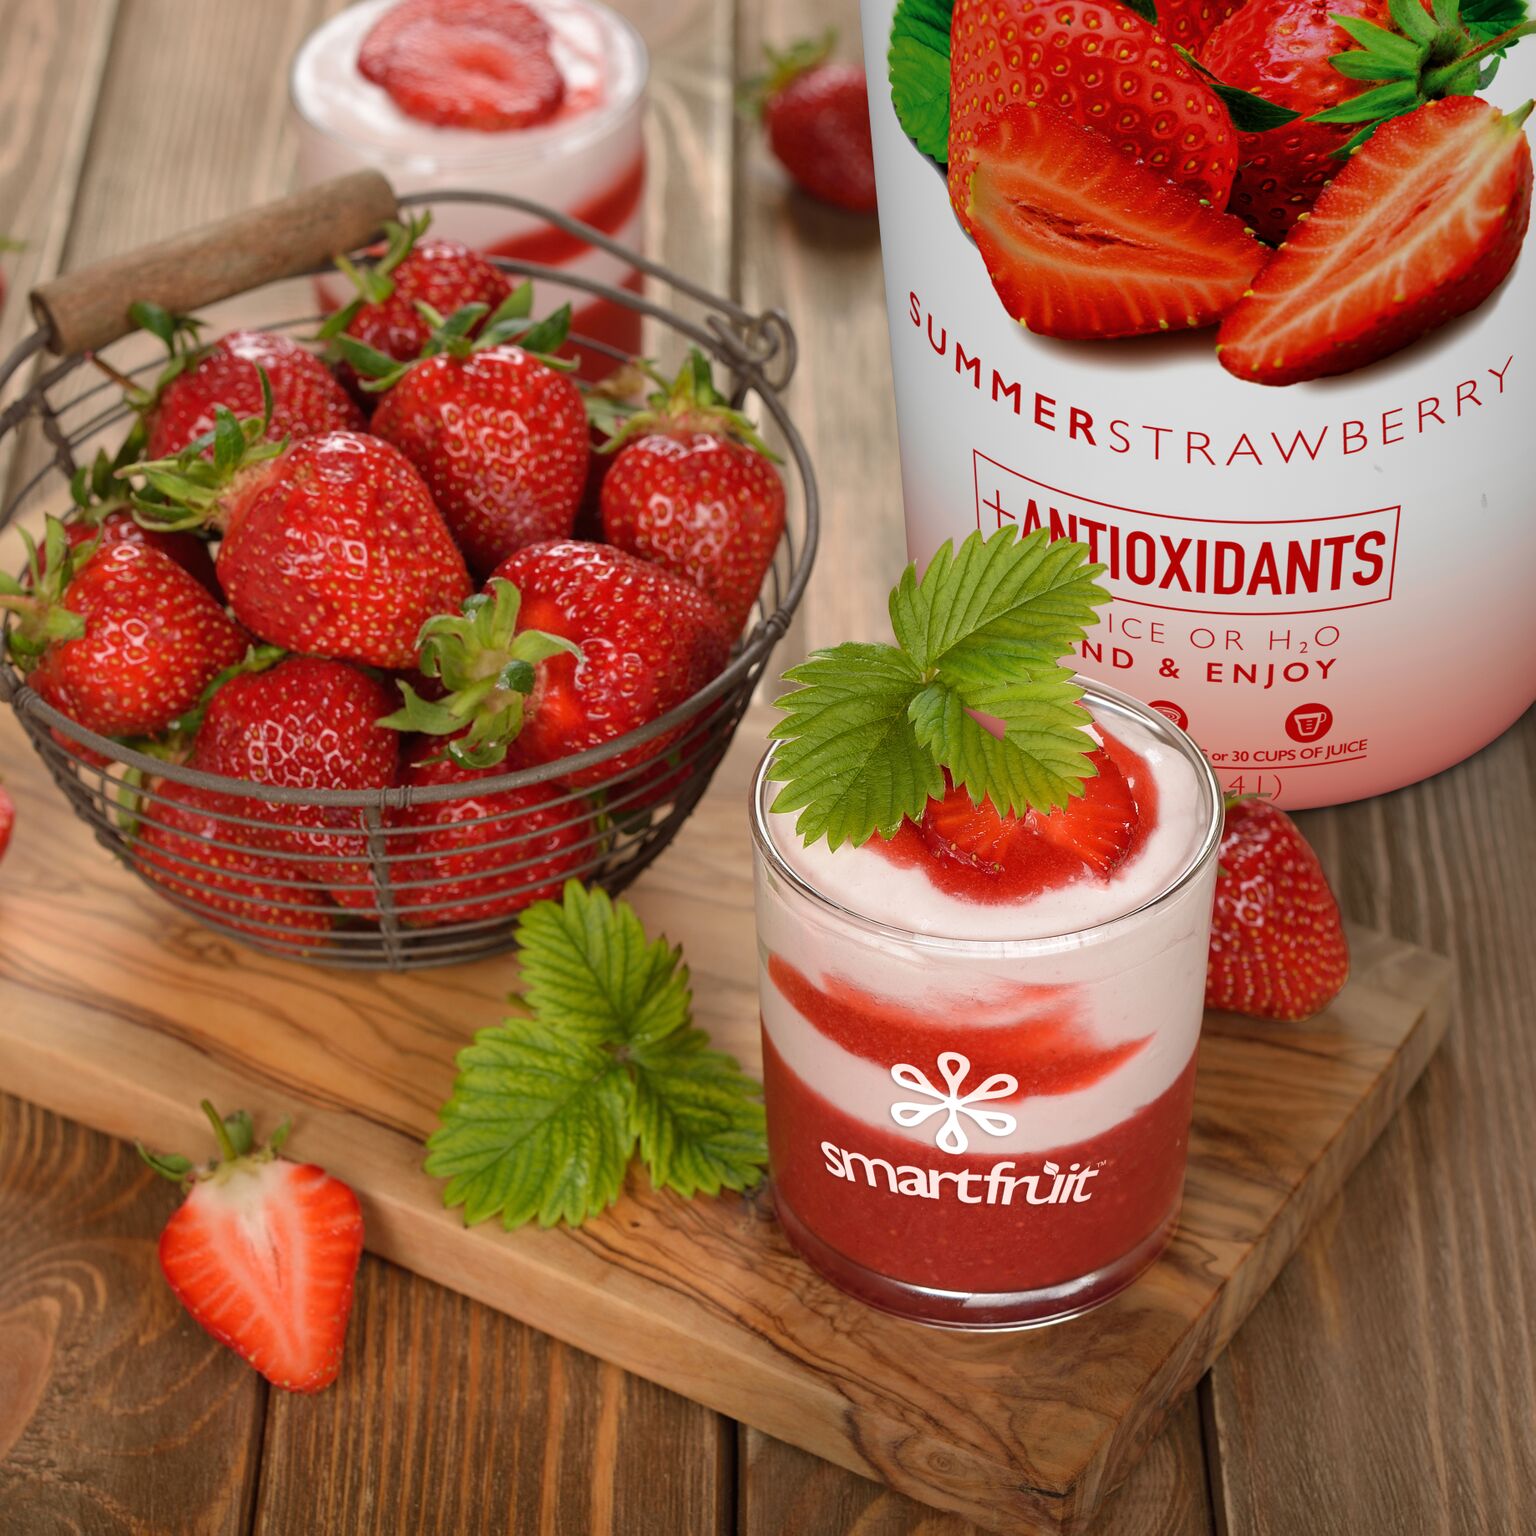 Summer Strawberries and Cream Parfait Made with Smoothie Mix